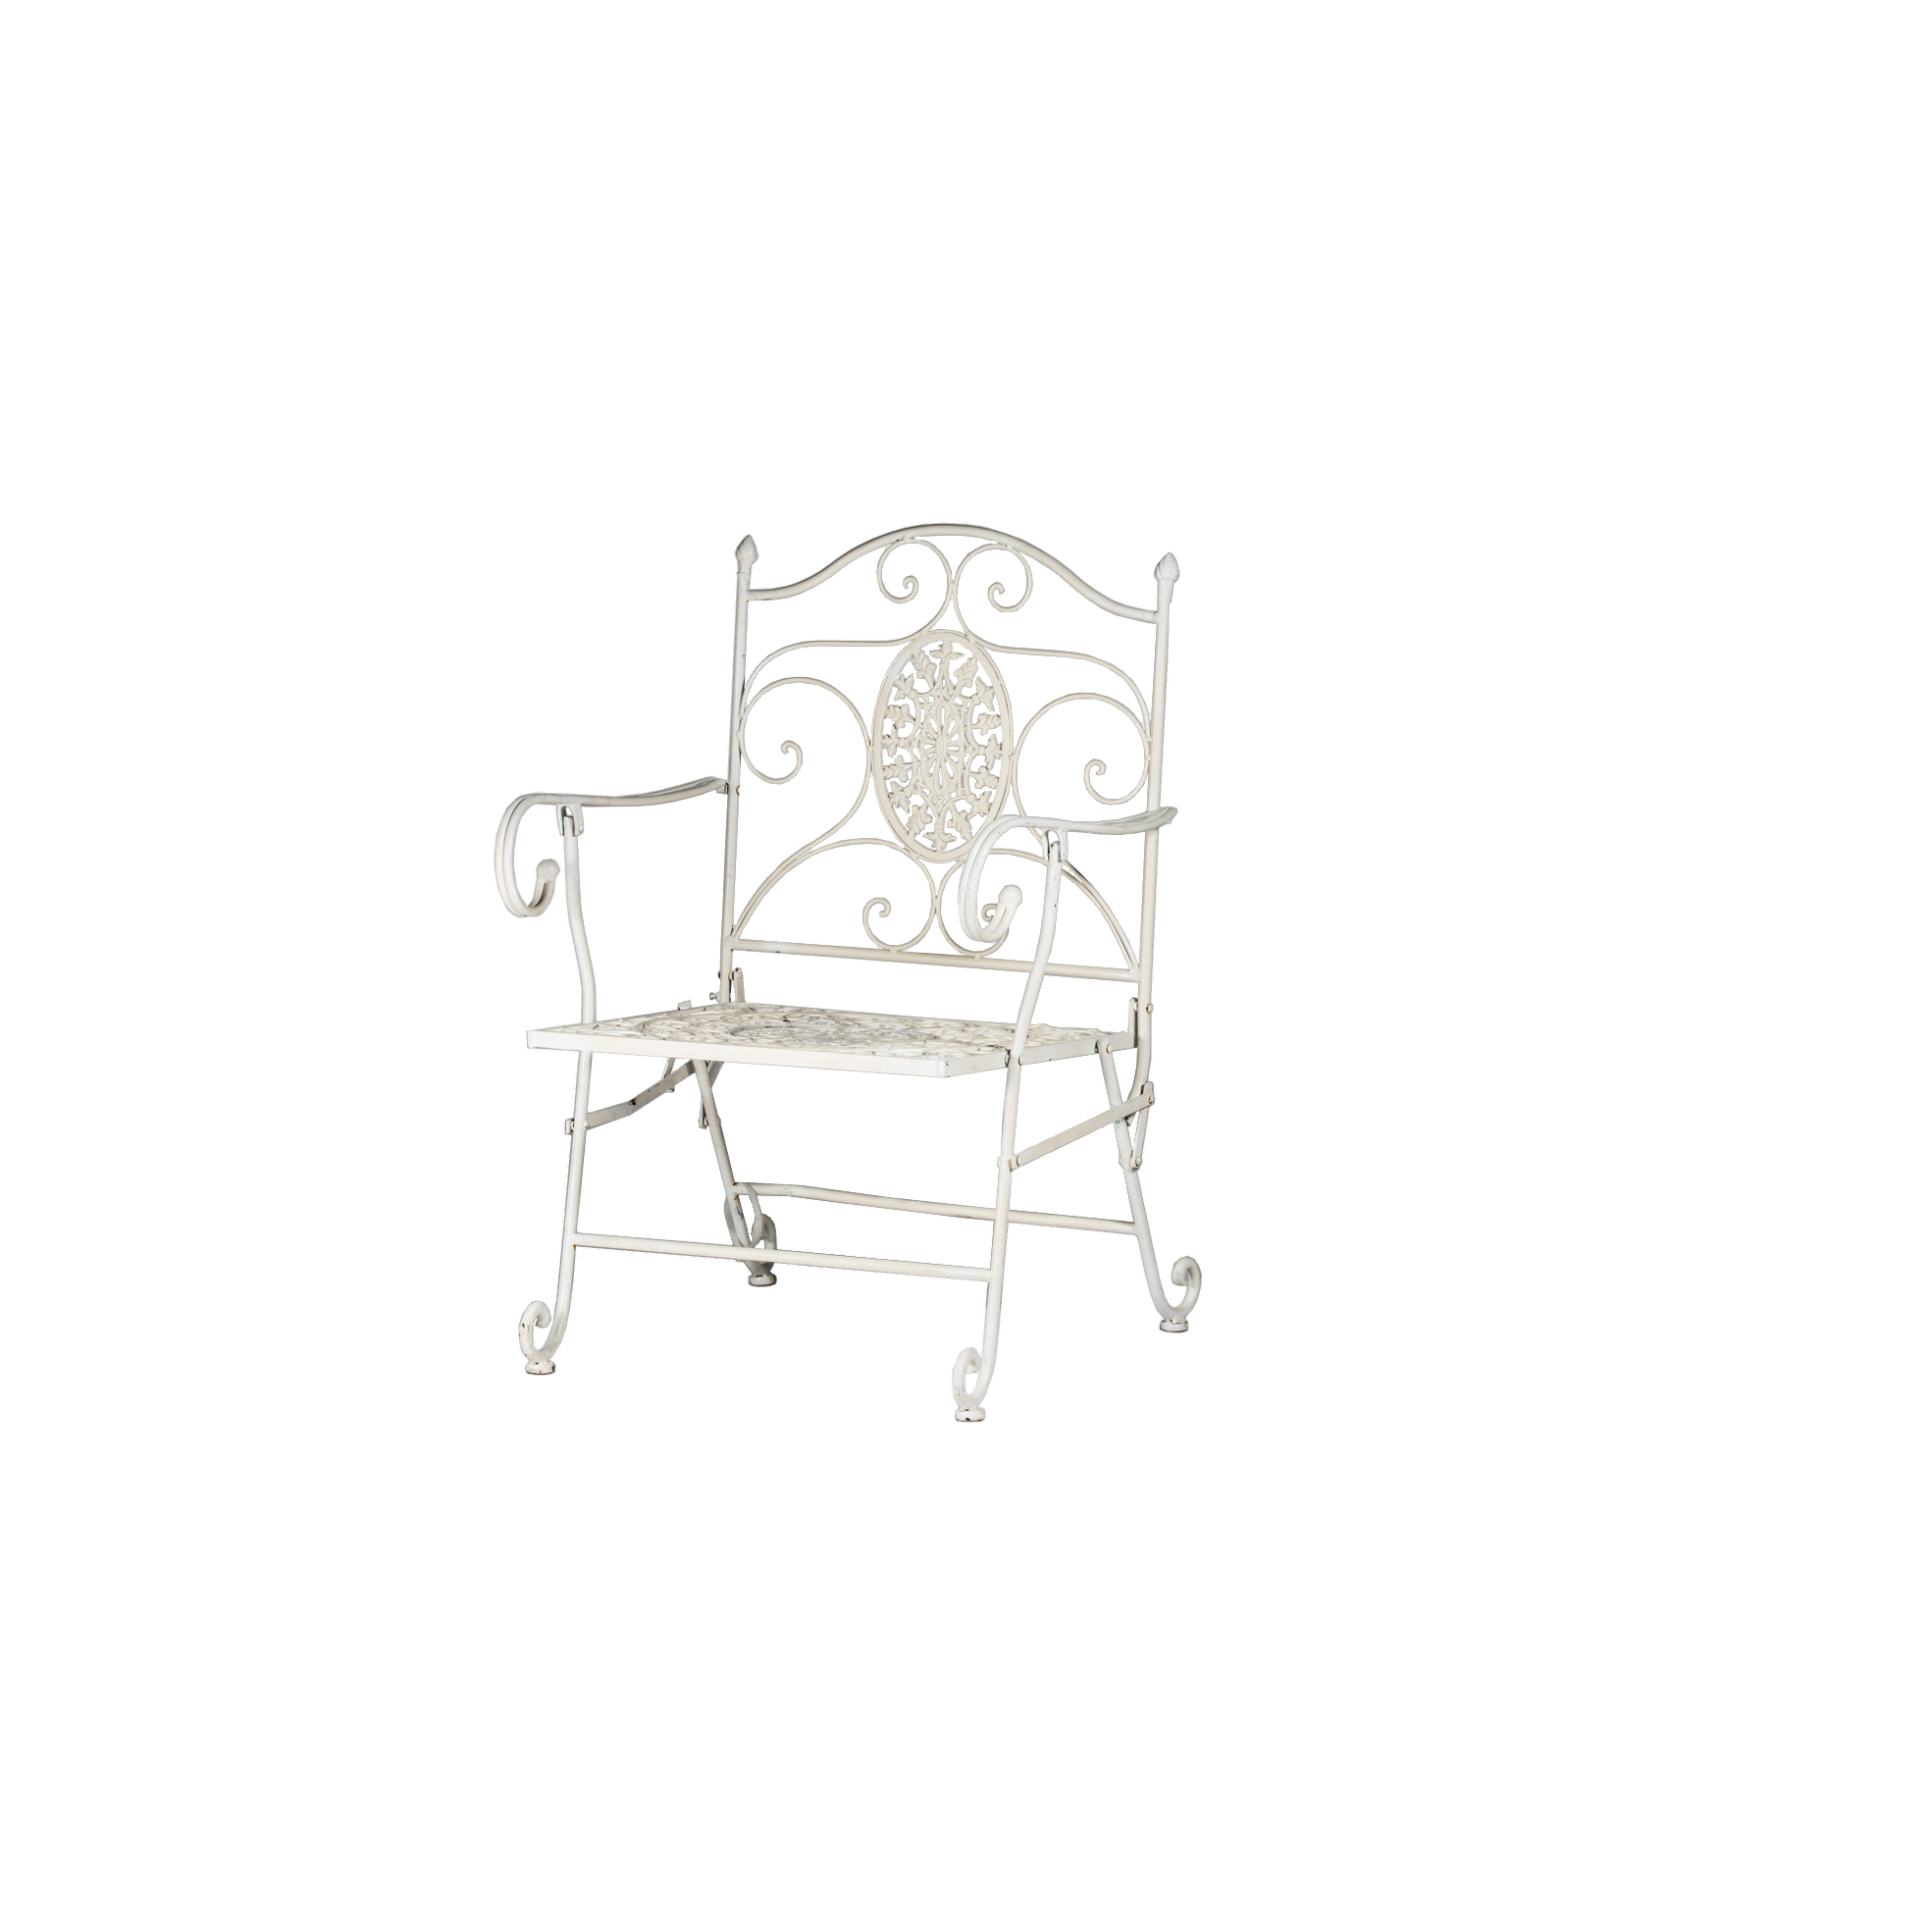 ARMCHAIR White Iron Bellevue (On-site assembly)